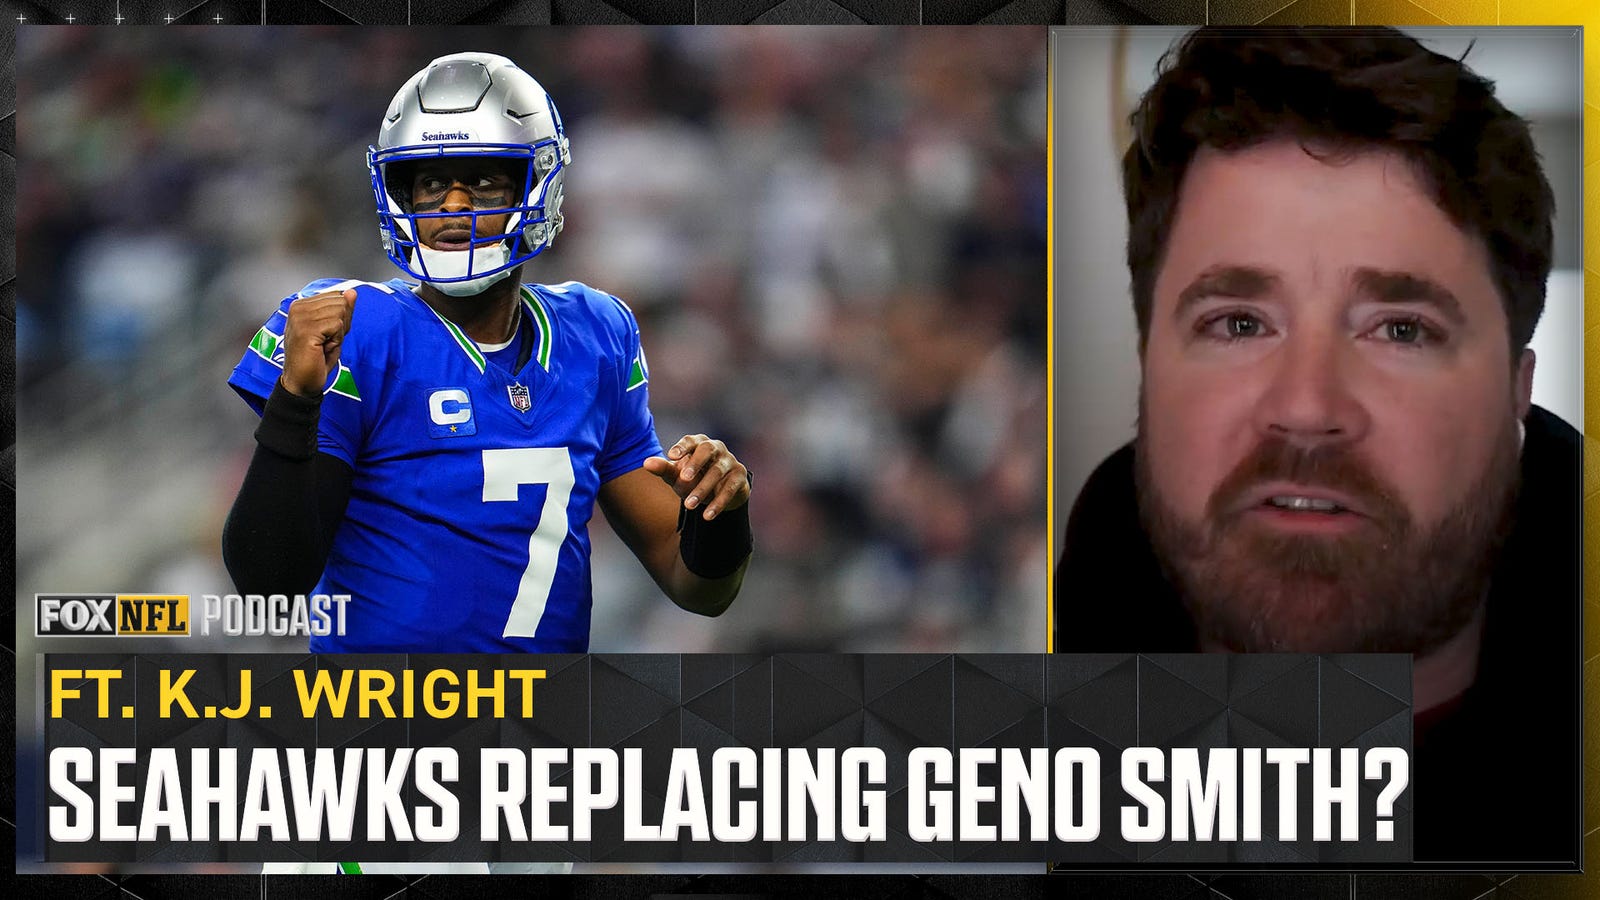 Will the Seahawks replace Geno Smith in the NFL Draft? 